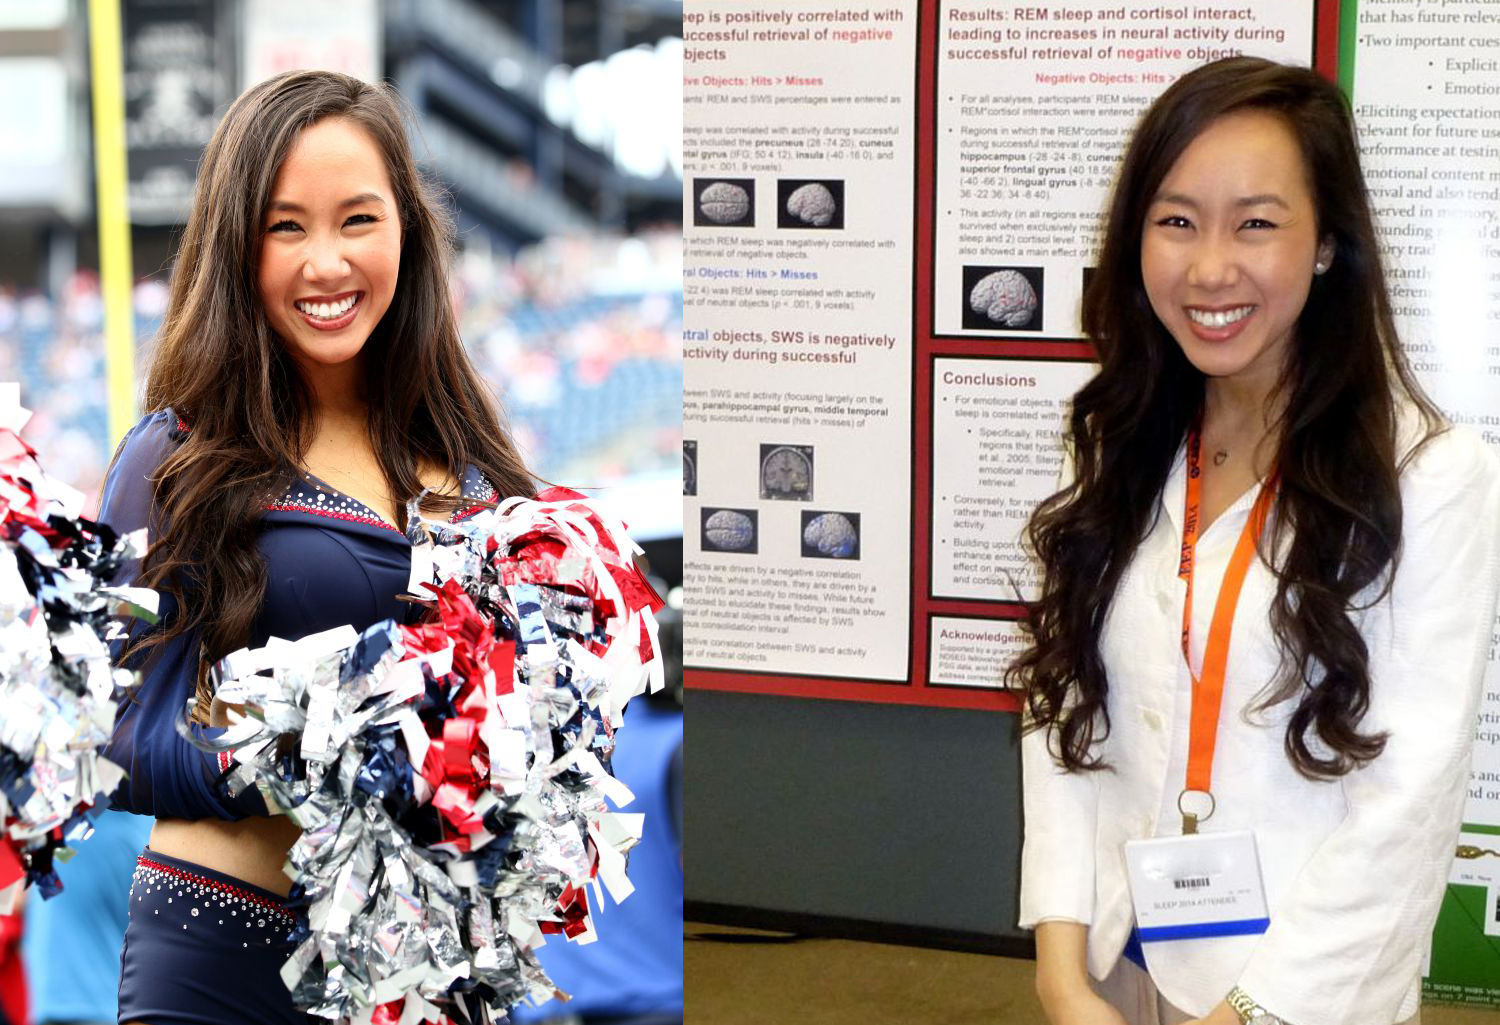 There's a group called Science Cheerleaders, made up of NBA and NFL 

cheerleaders who also work or study in STEM fields, that encourage girls to 

get into science studies.